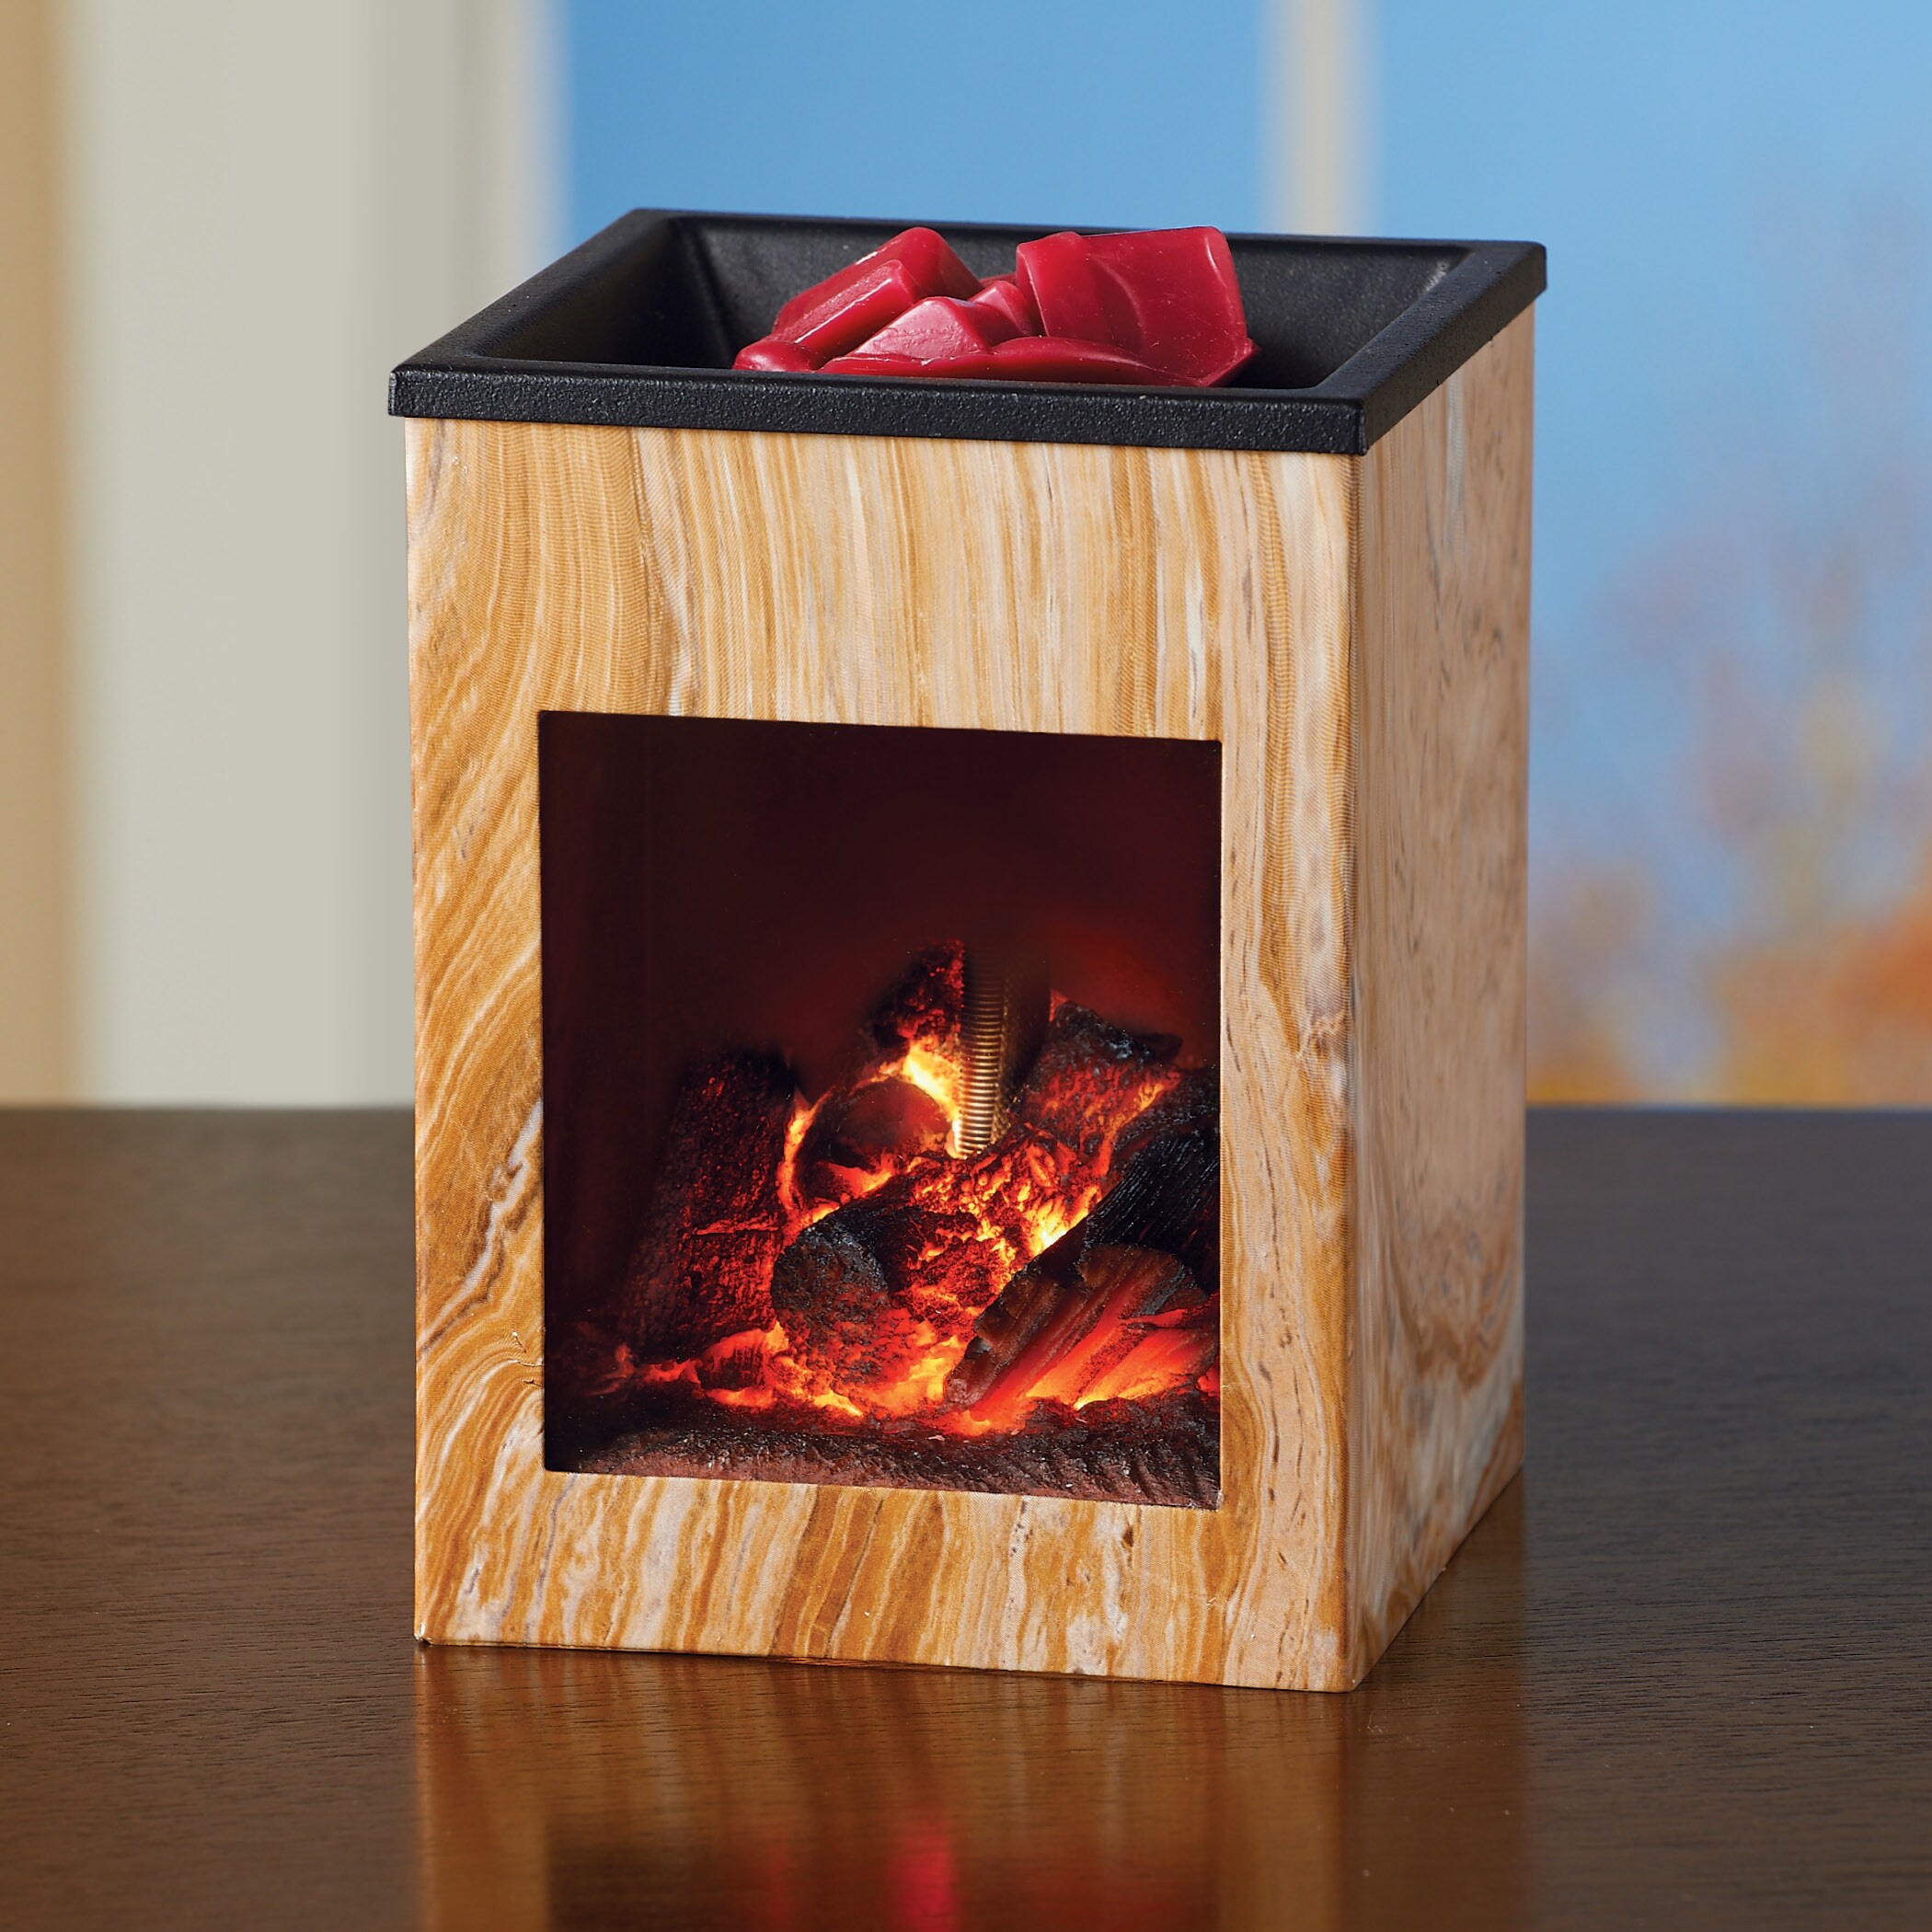 https://ak1.ostkcdn.com/images/products/is/images/direct/98a75409b63a852a8f5233c920e9358bd80b9df7/Unique-Fireplace-Electric-Wax-Warmer.jpg